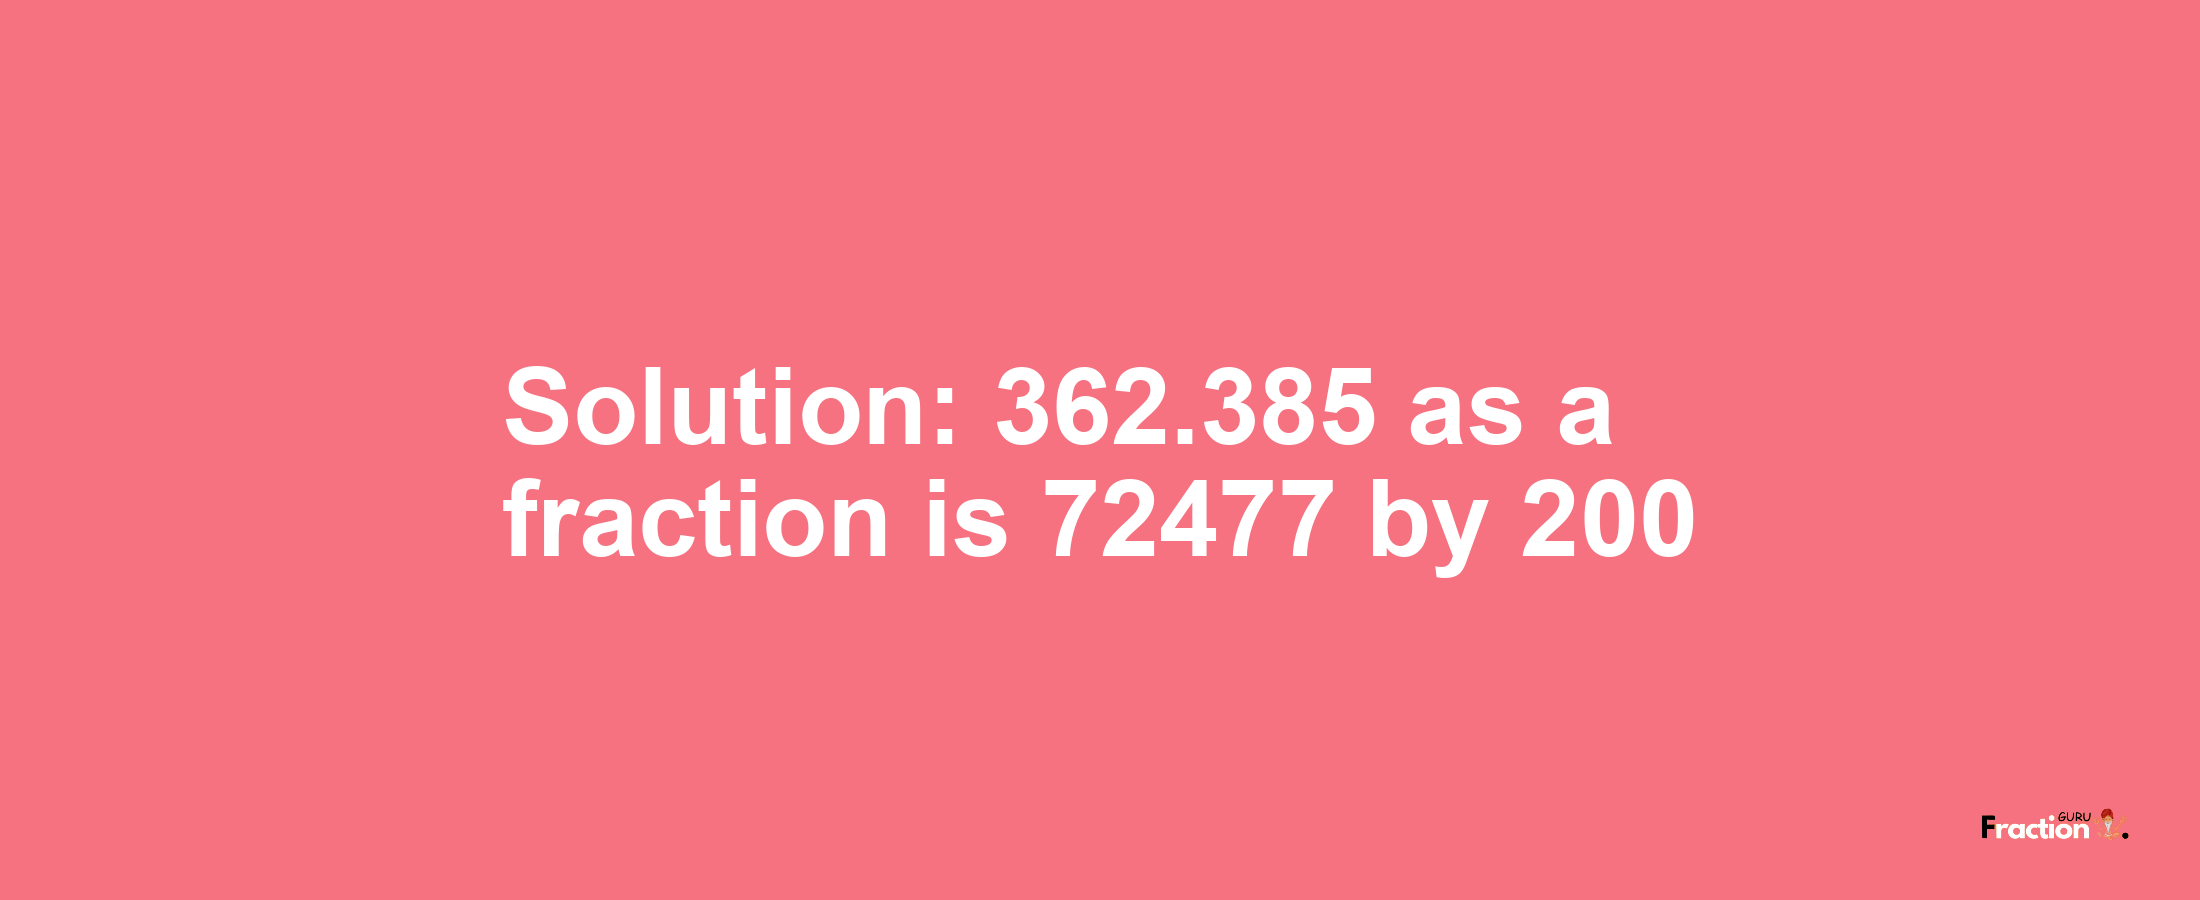 Solution:362.385 as a fraction is 72477/200